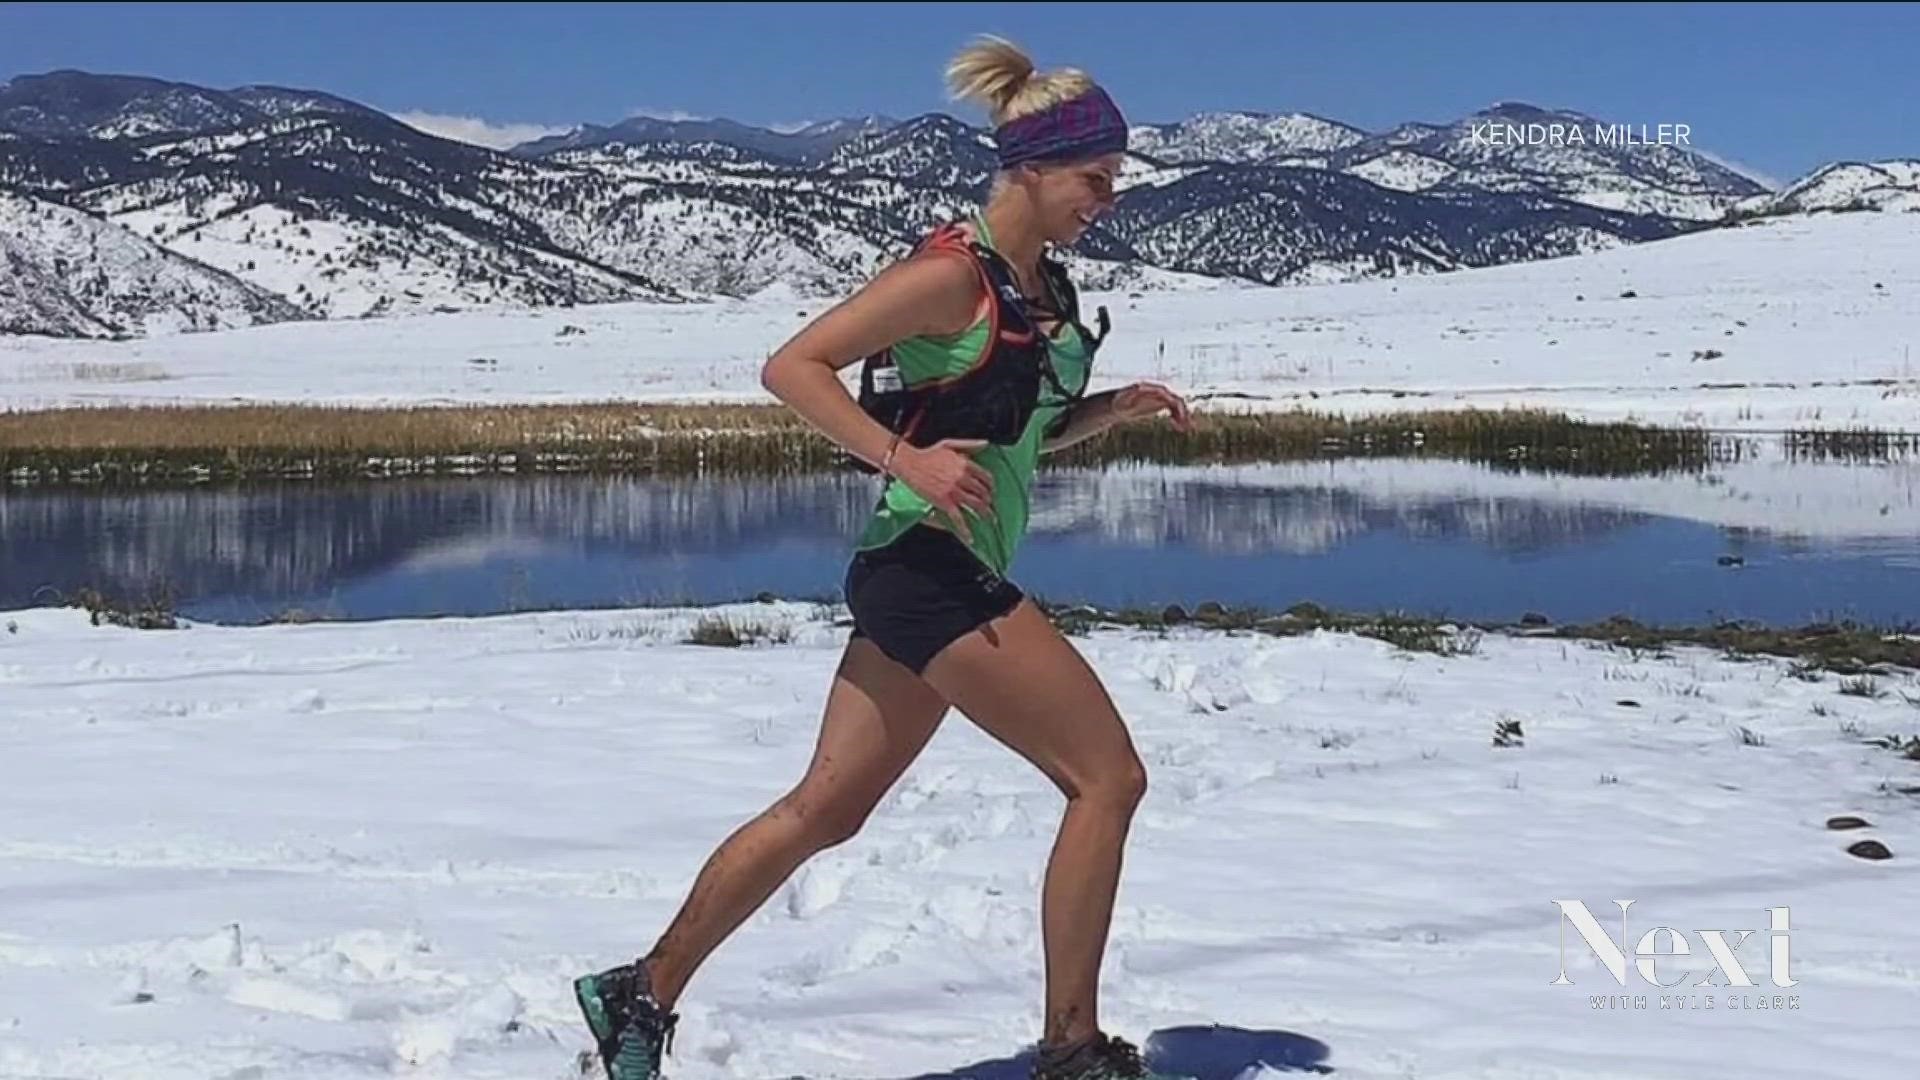 Kendra Miller will run the Colorado stretch of the MS Run the US relay, running from Steamboat Springs to Denver.